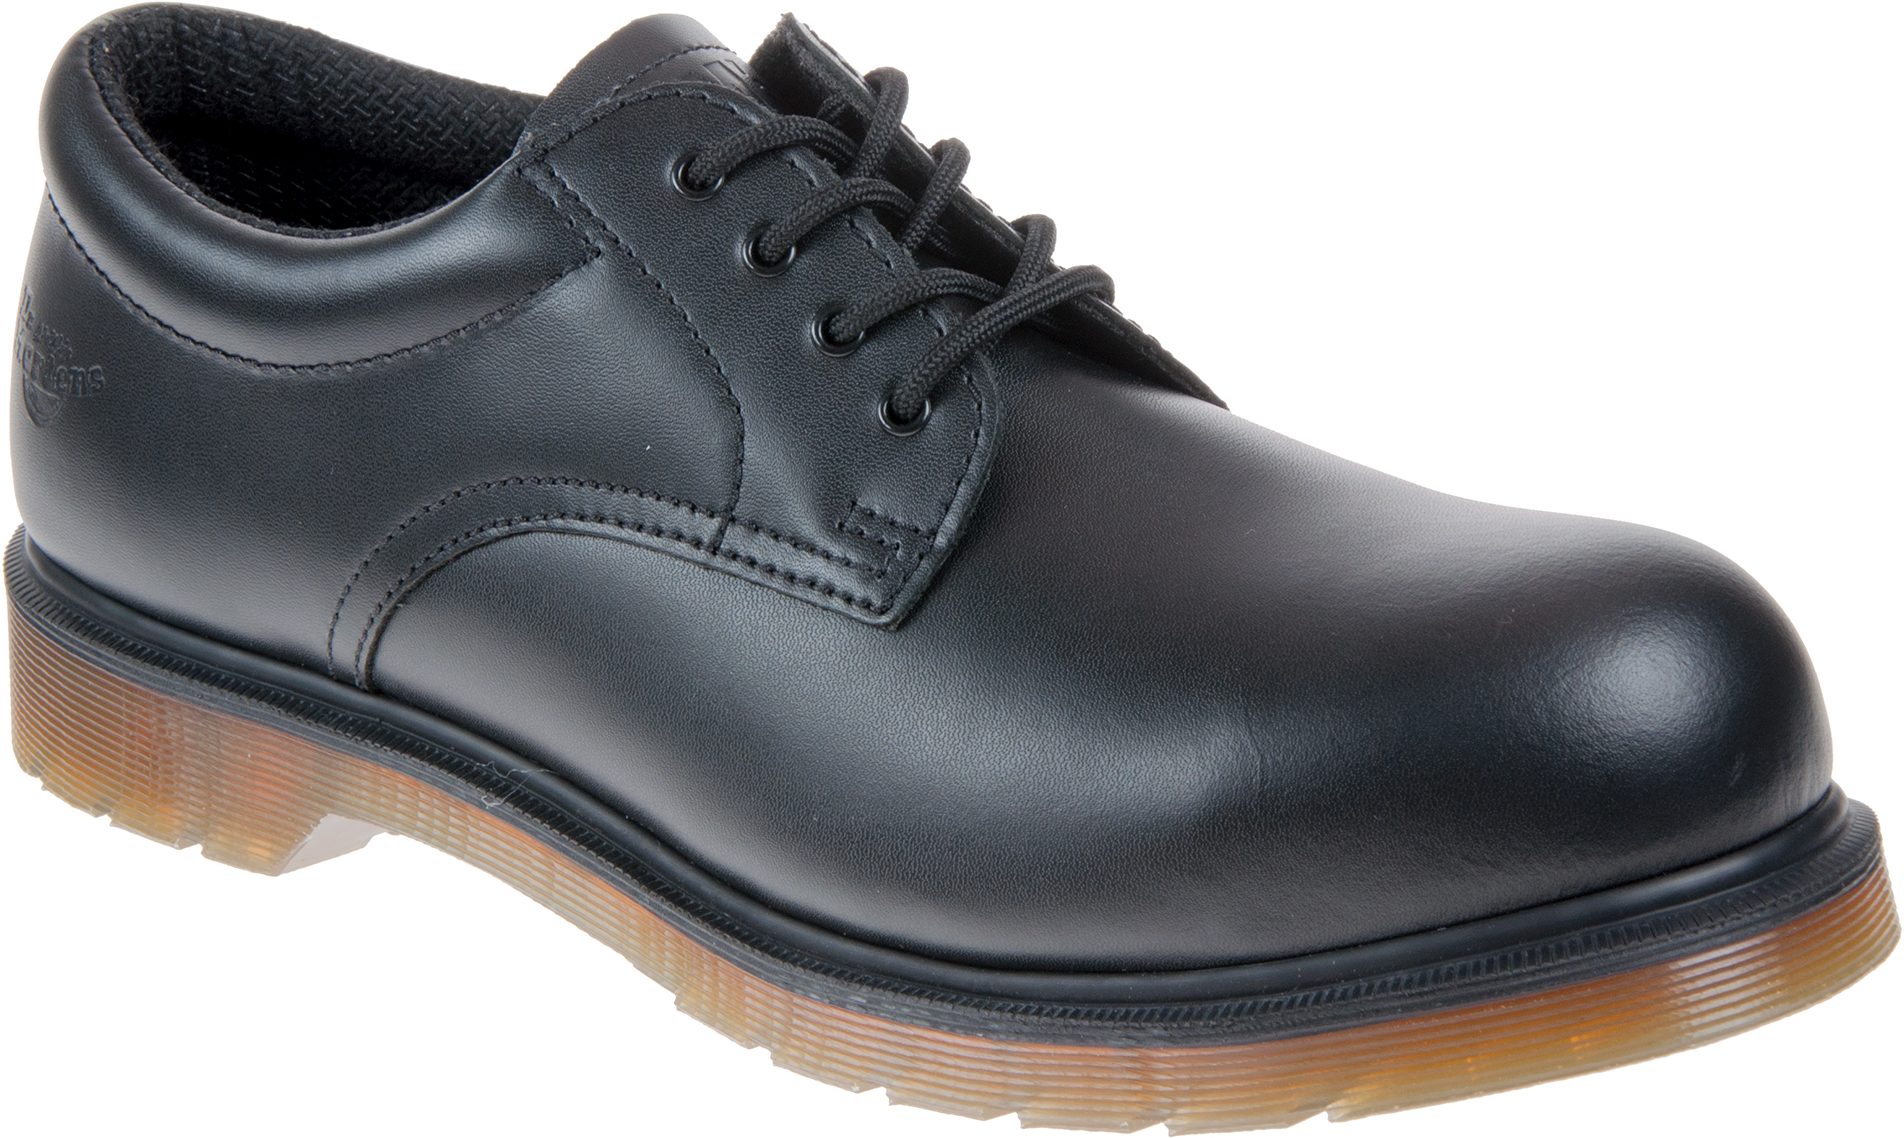 Dr. Martens 2216 Safety Shoe Black 13711001 - Casual Shoes - Humphries ...